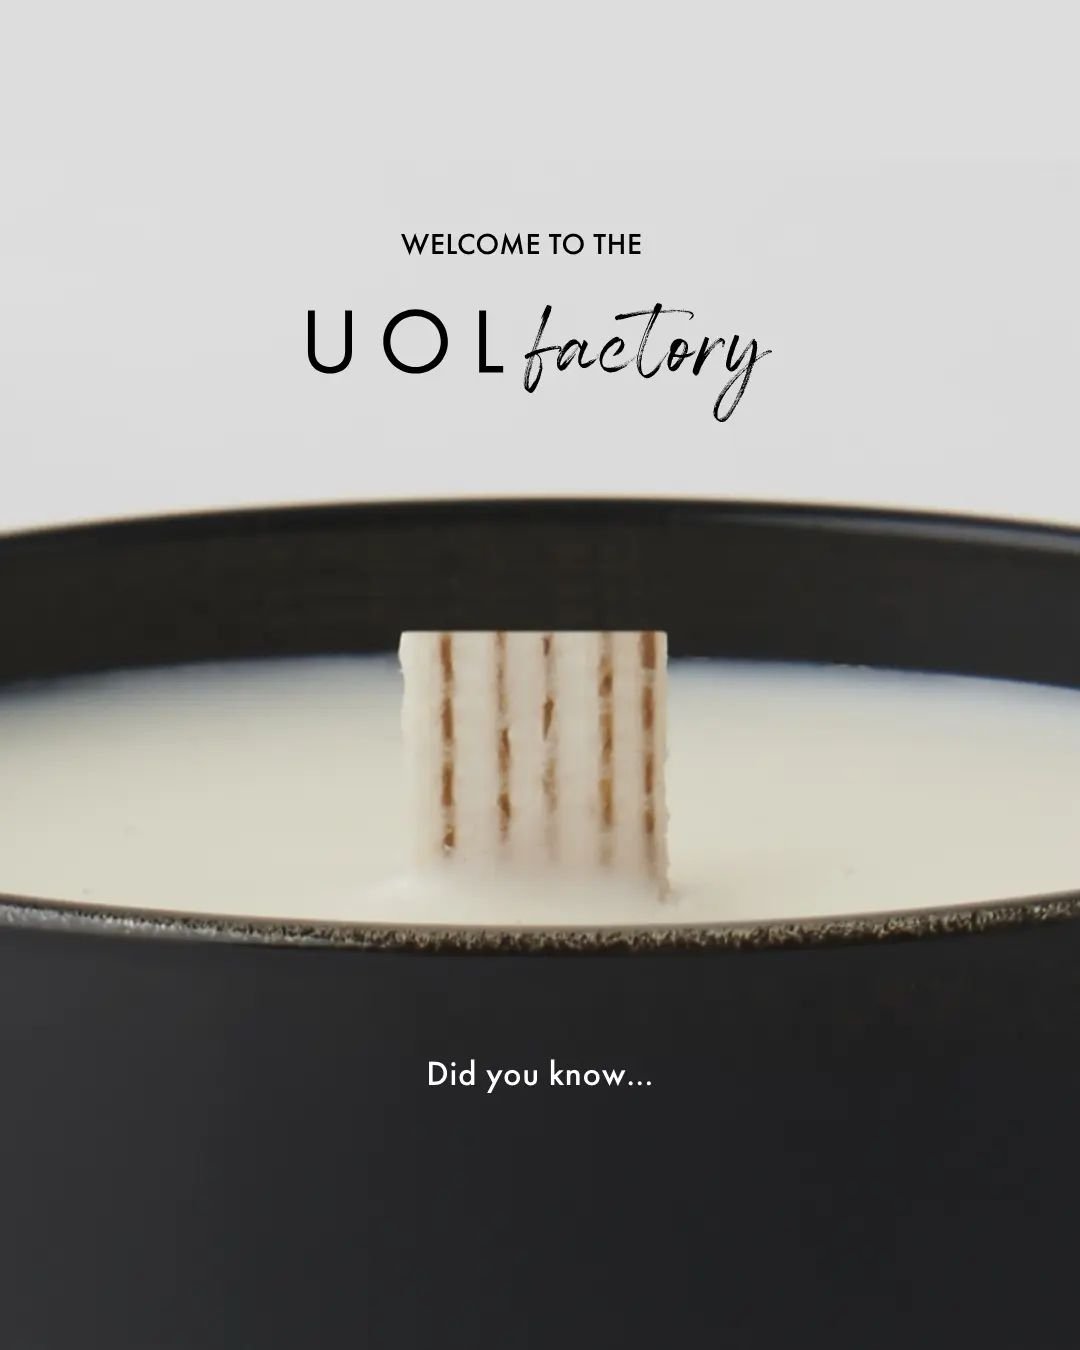 We've surpassed the 1500 followers mark, 🎉, and it felt like a good time to tell you a little more about us.

So hello 👋, we're Union of London and we make original scents by hand at our UOLfactory. Did you know that your olfactory or sense of smel